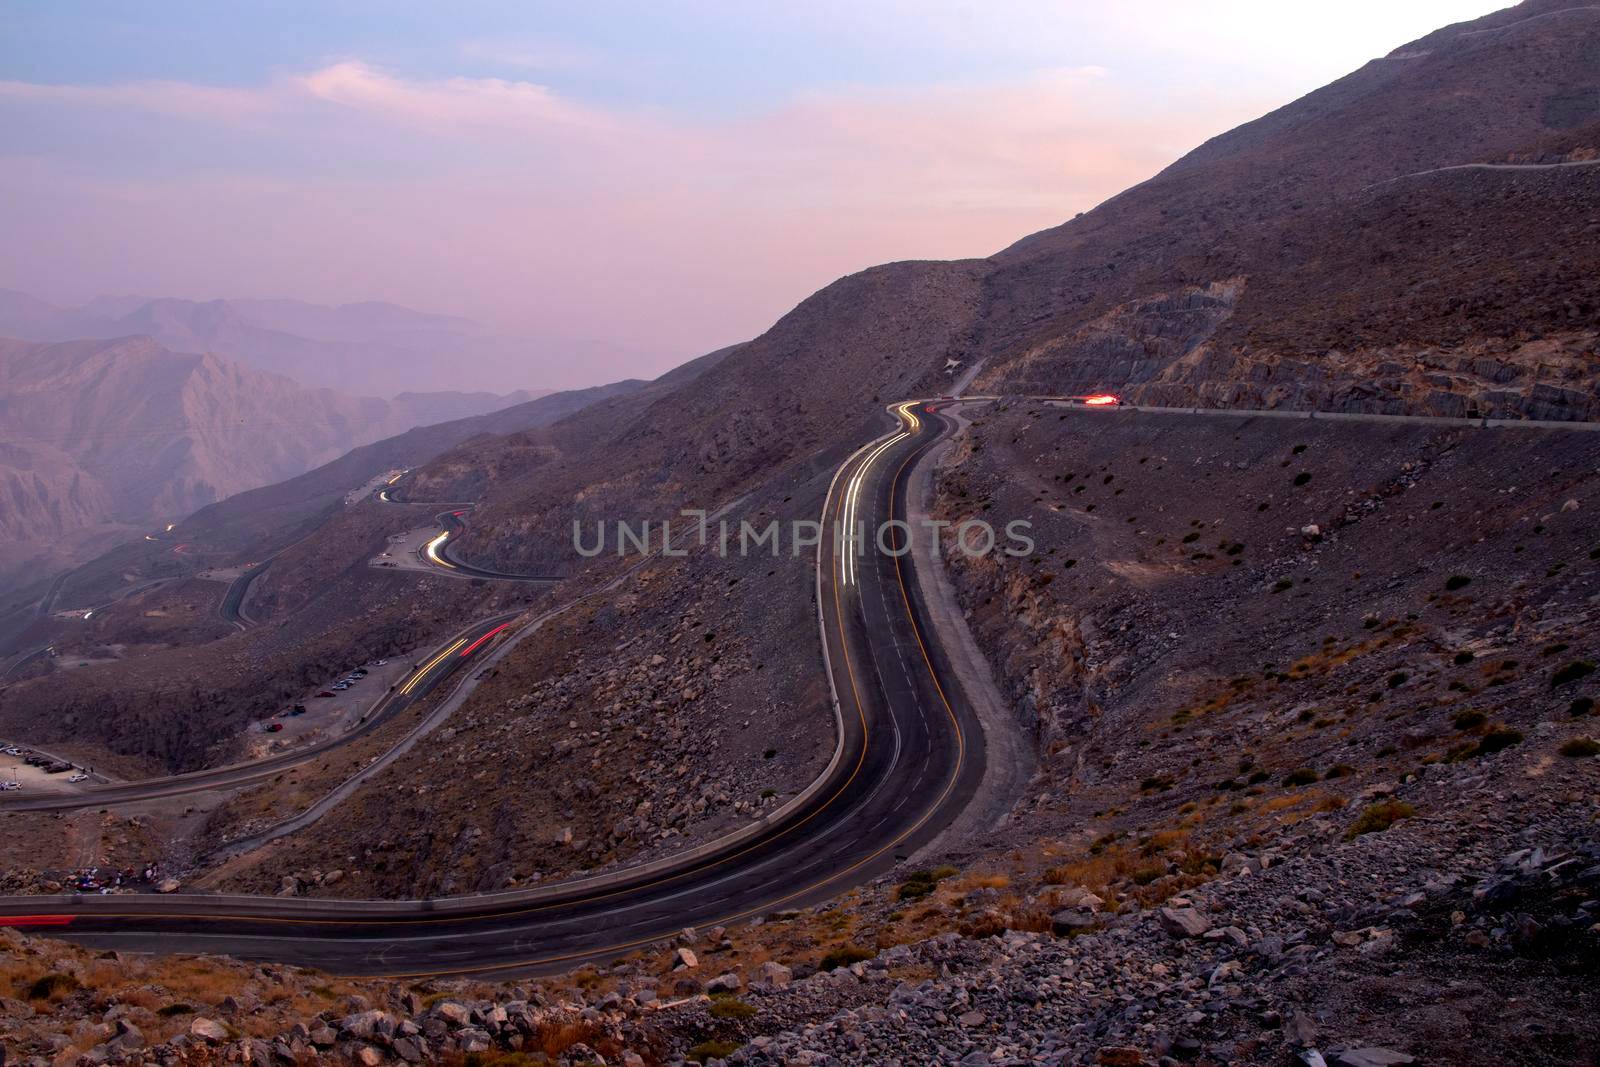 View from Jebael Jais mountain of Ras Al Khaimah emirate in the evening. United Arab Emirates, Outdoors. Light trails from the car